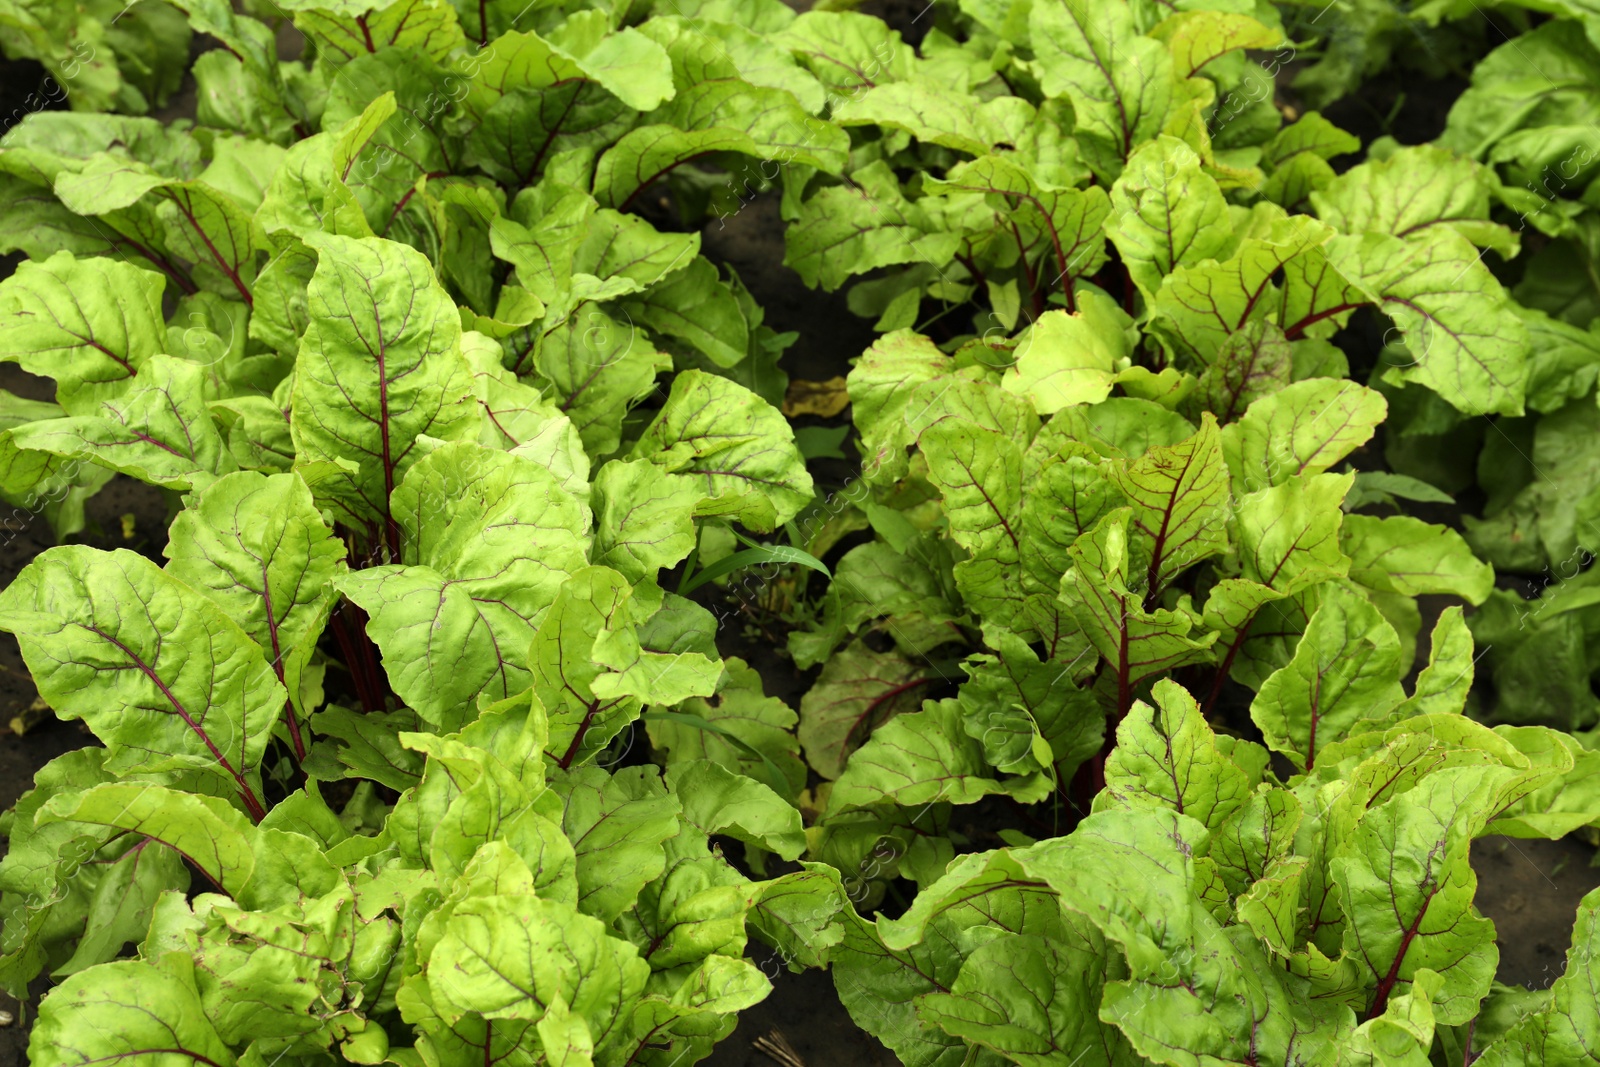 Photo of Beetroot plants with green leaves growing in garden